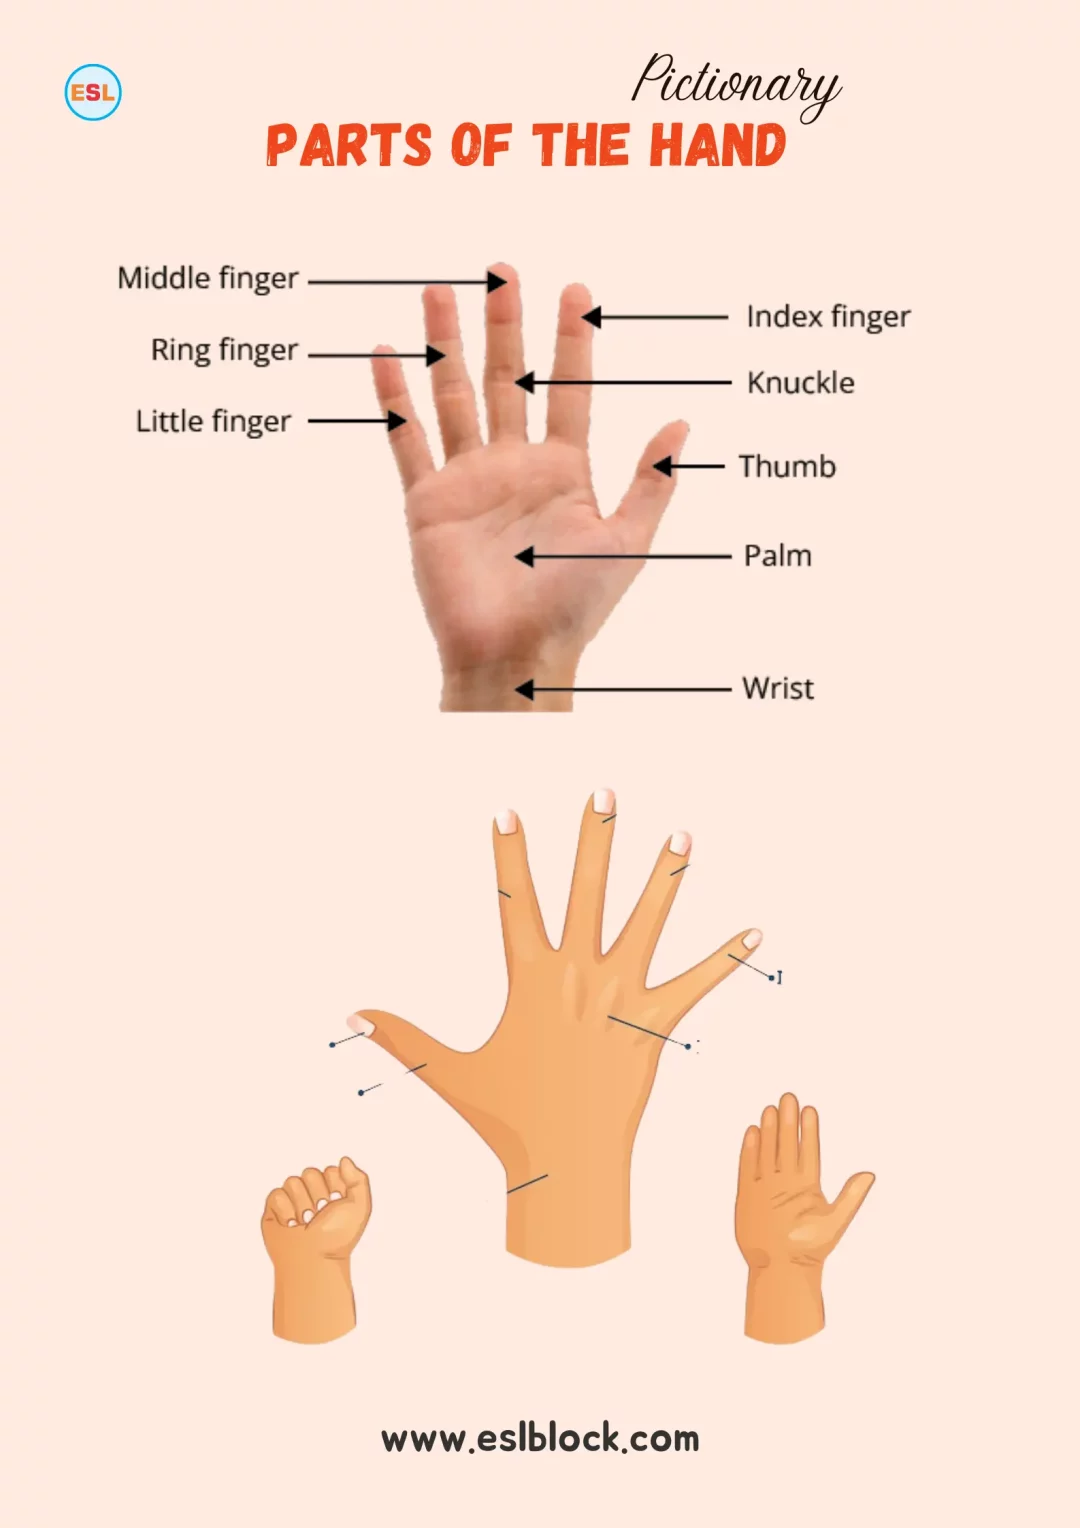 Parts of the Hand with Pictures